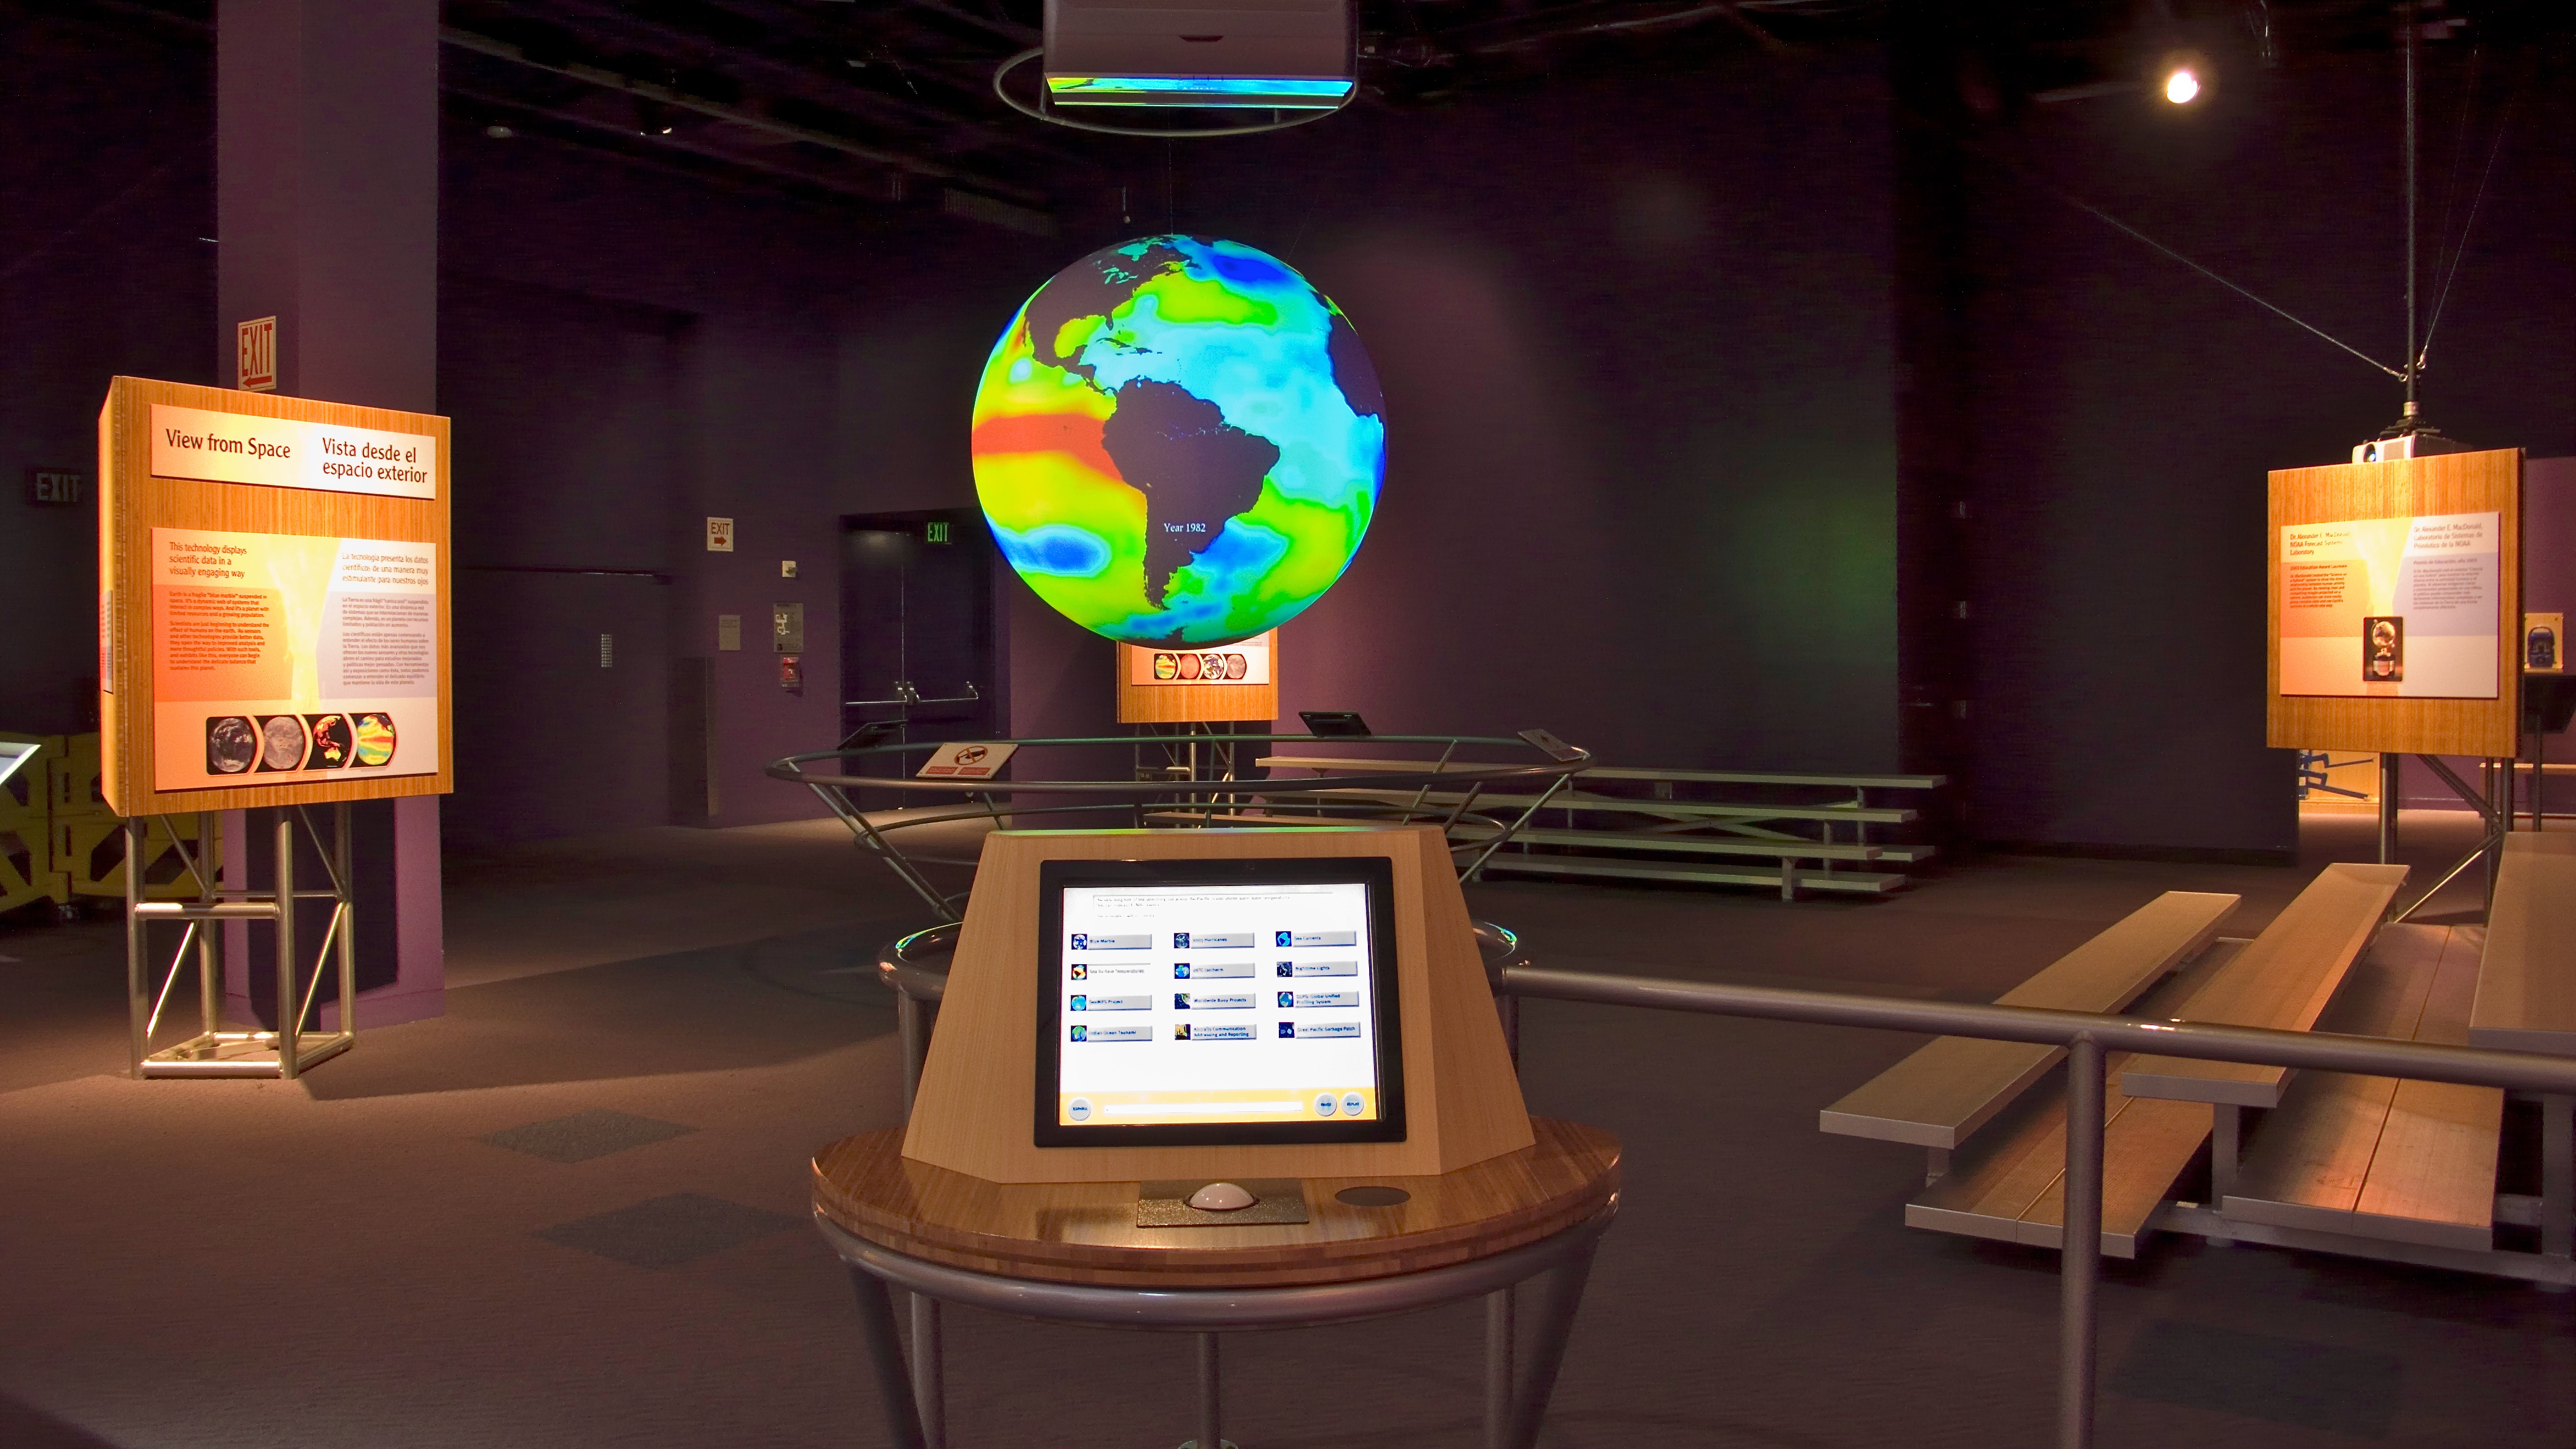 Science On a Sphere hangs in an empty exhibit space. A monitor with a track ball sits on a table in front of the Sphere. Two sets of risers are situated around the Sphere, and placards containing additional information are visible in the background